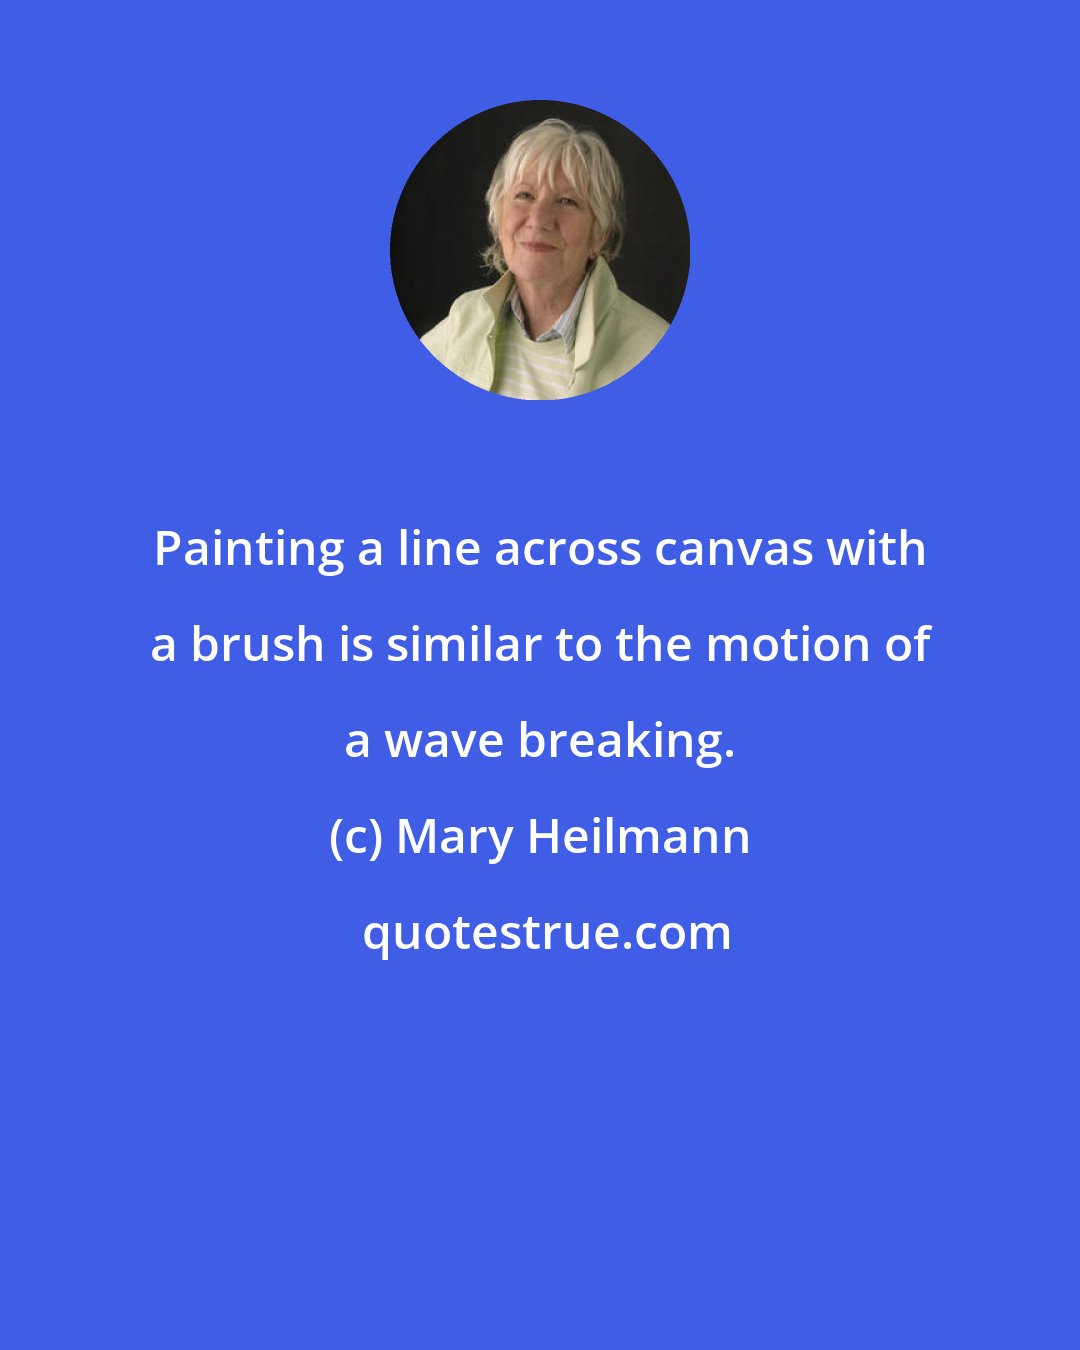 Mary Heilmann: Painting a line across canvas with a brush is similar to the motion of a wave breaking.